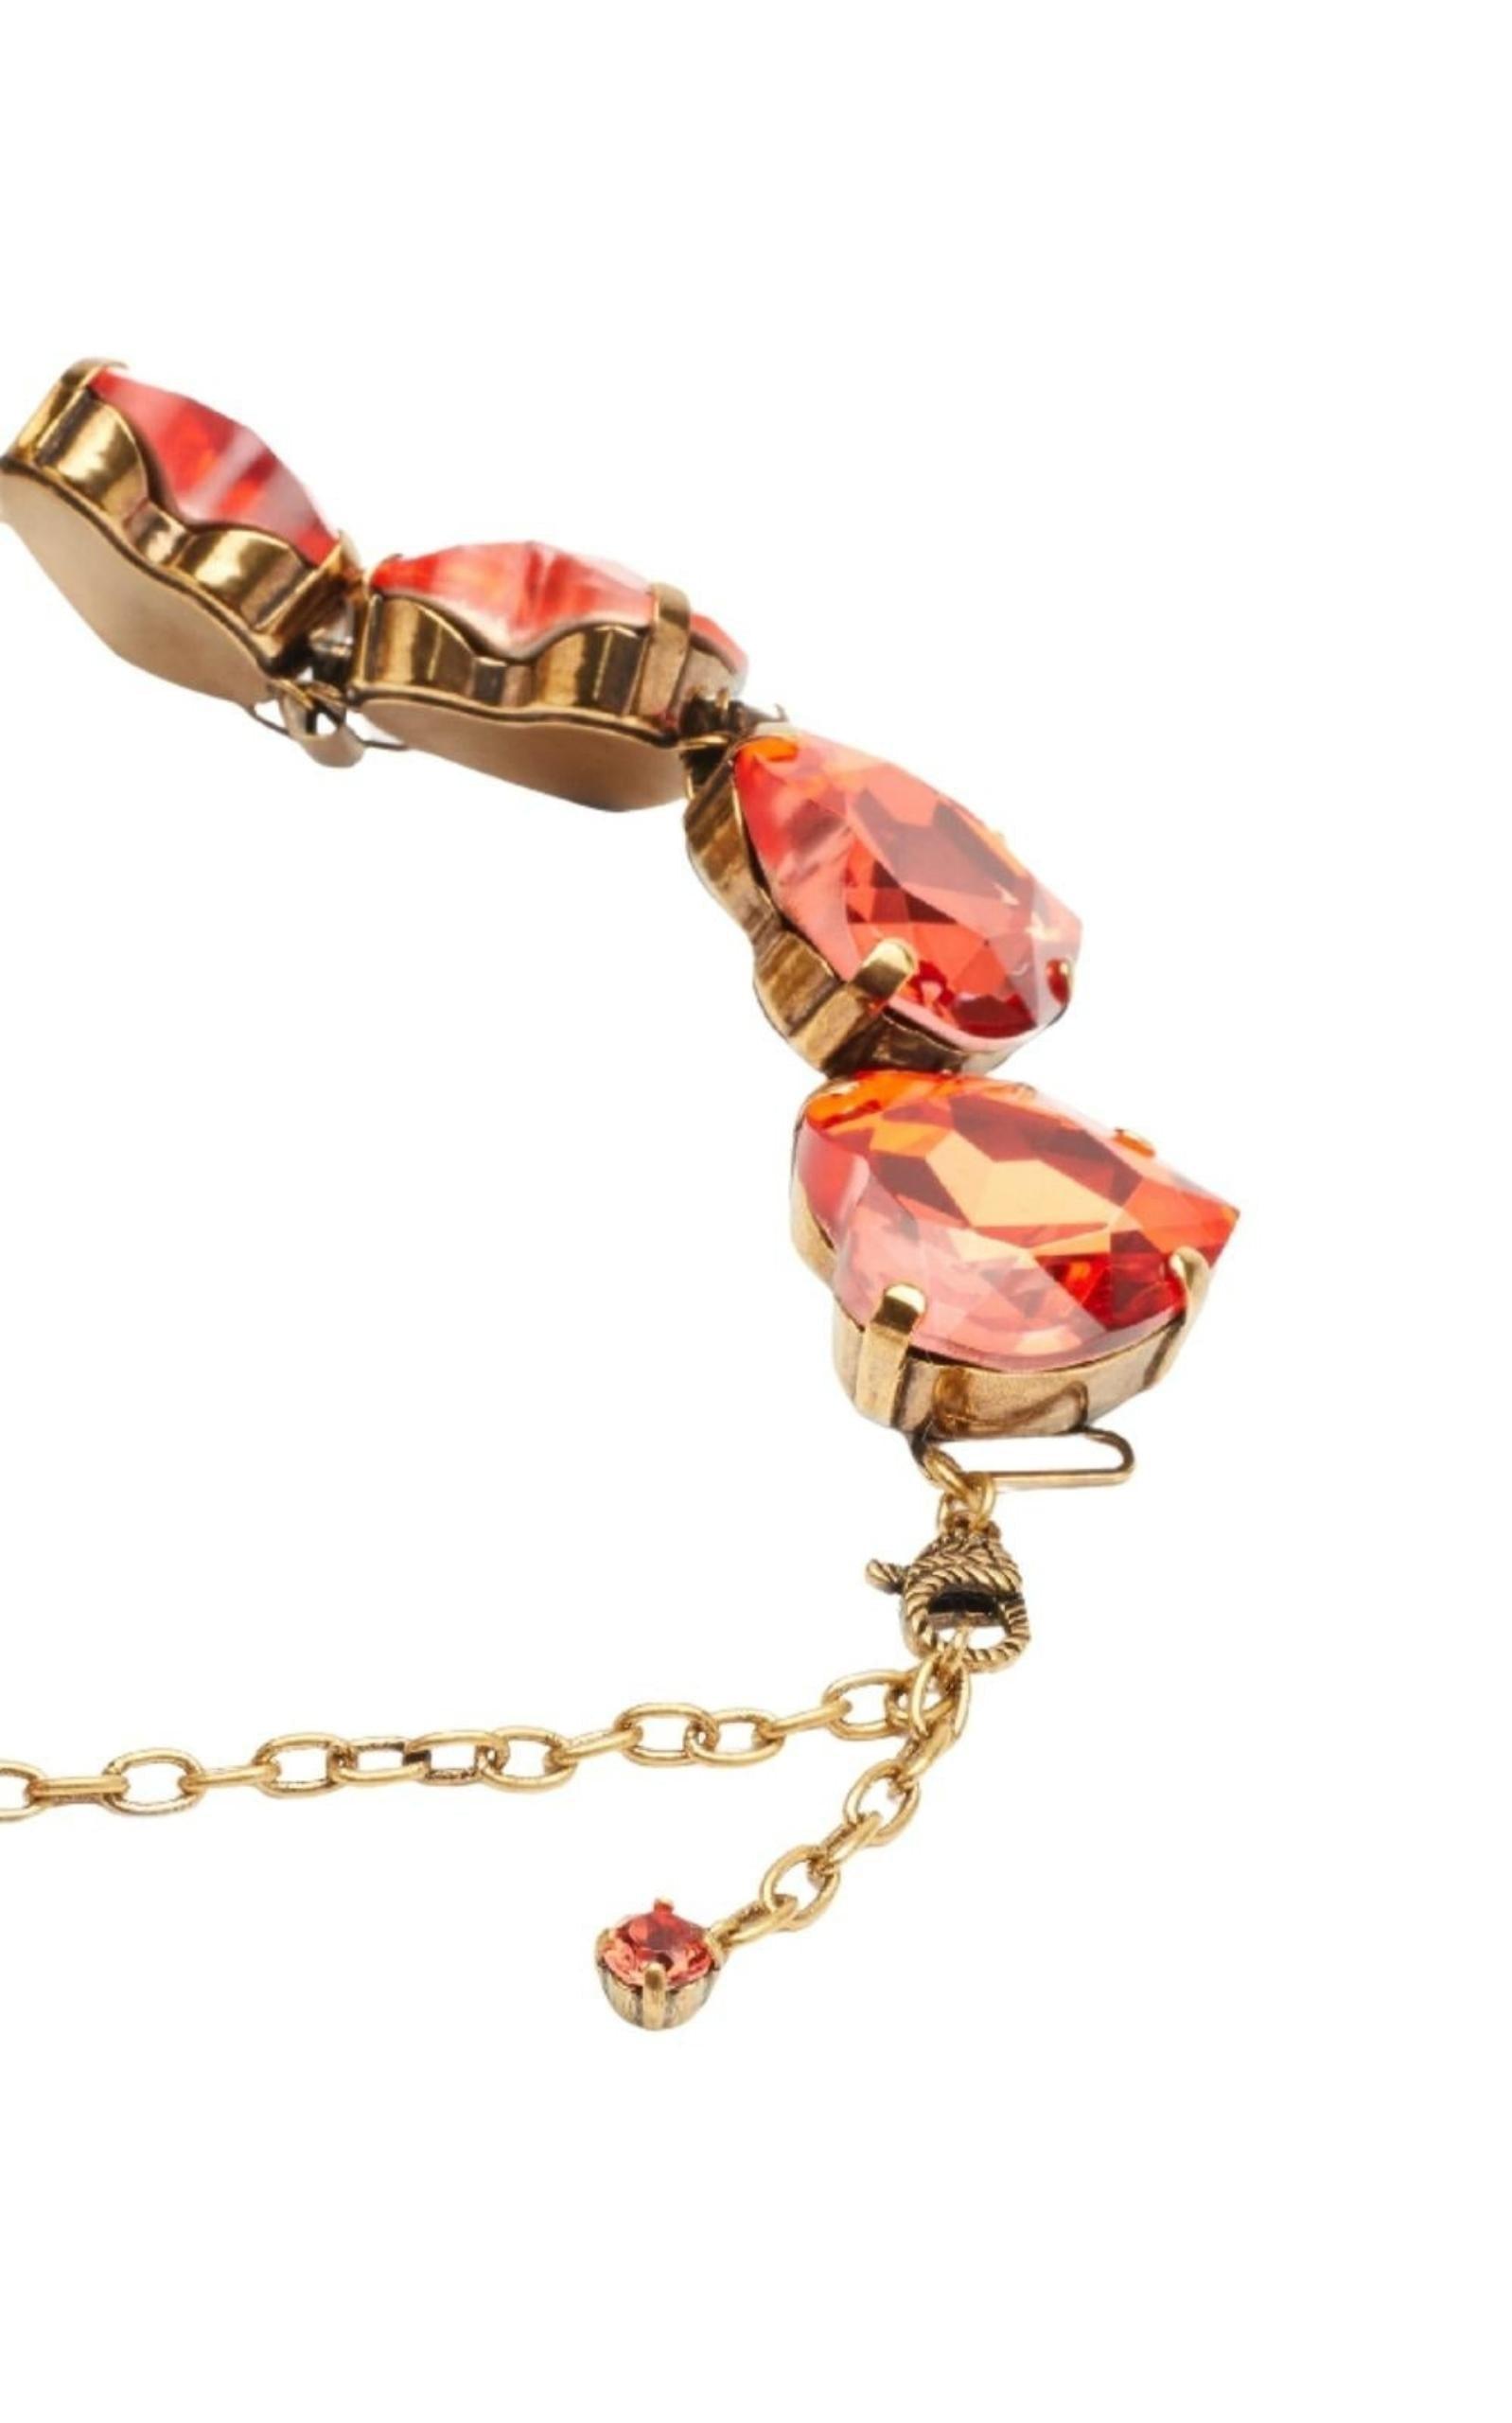 GUCCI Crystal Embellished Strawberry Necklace Red Aged Gold 951074